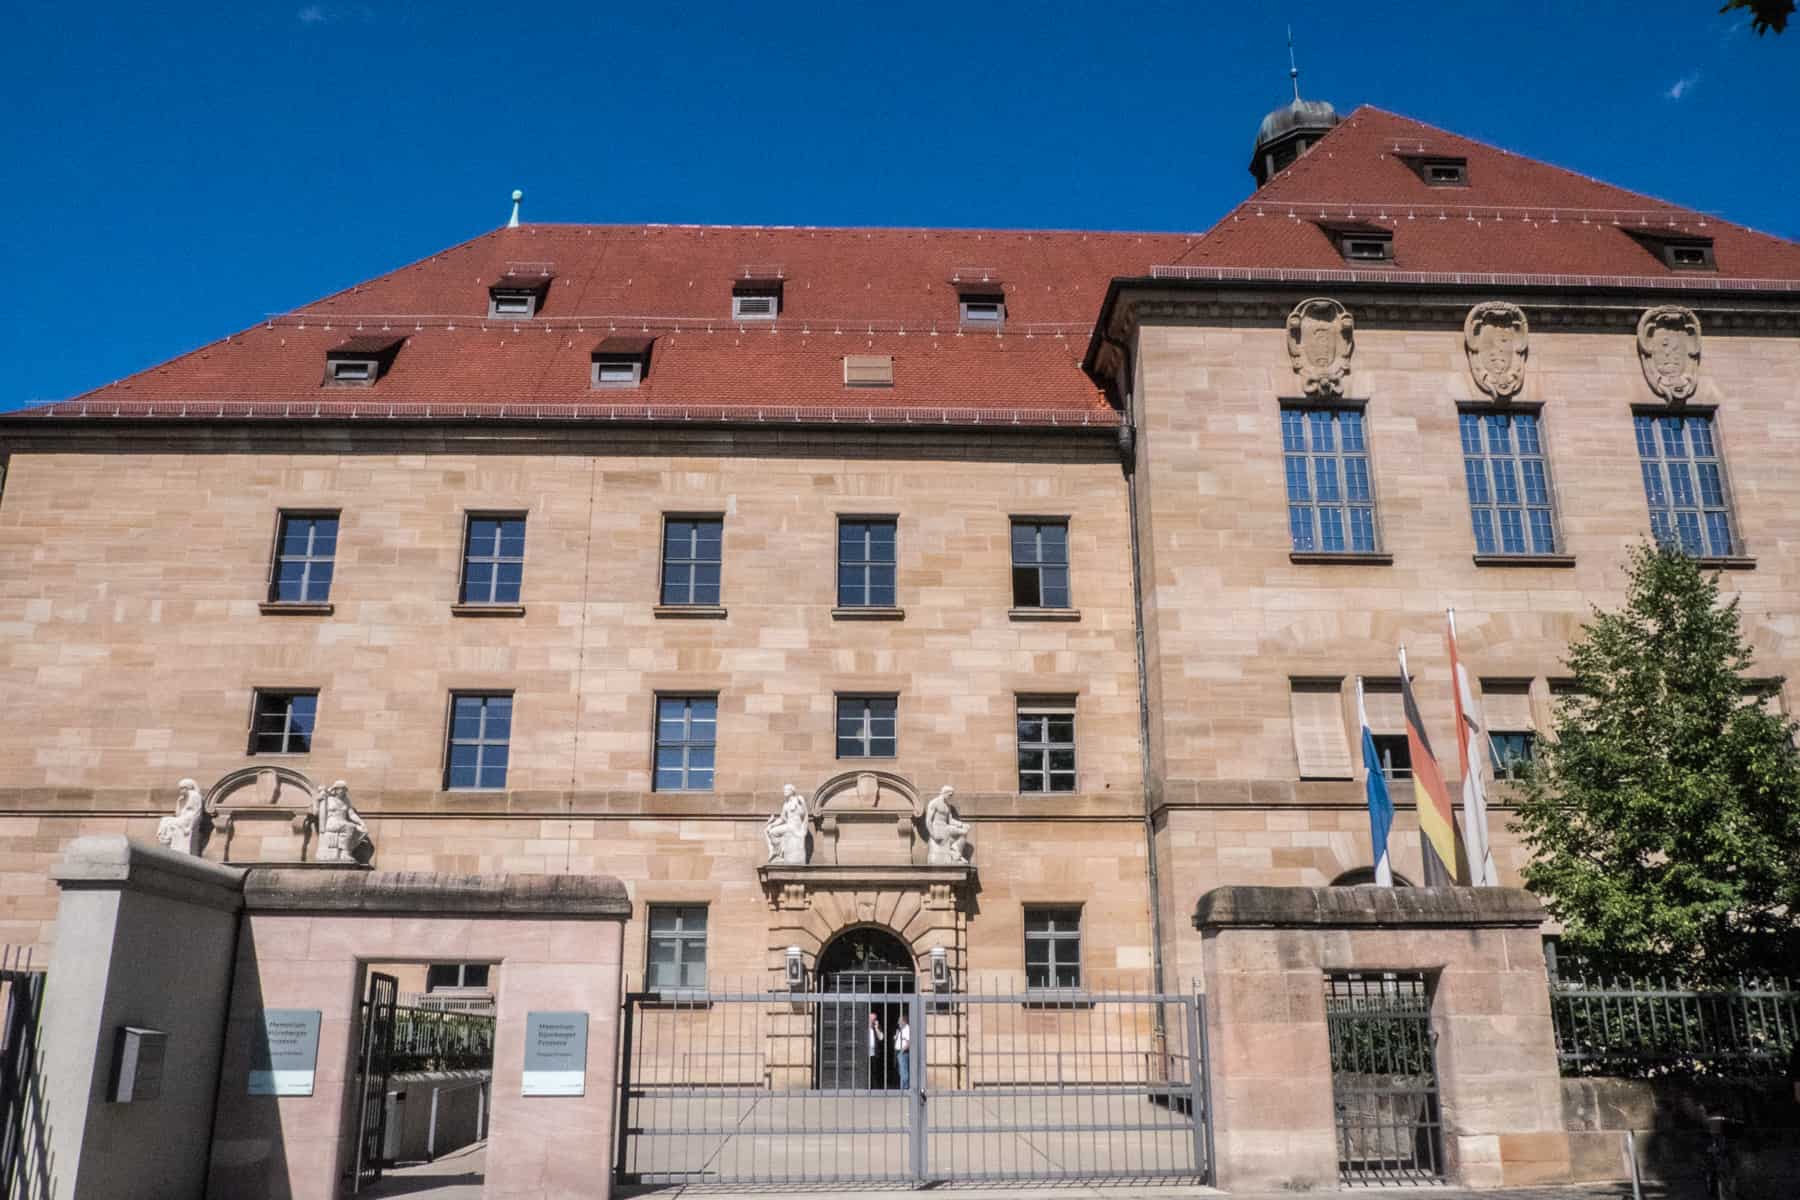 The main entrance to the Palace of Justice famed for where the Nuremberg Trials of leading Nazis took place